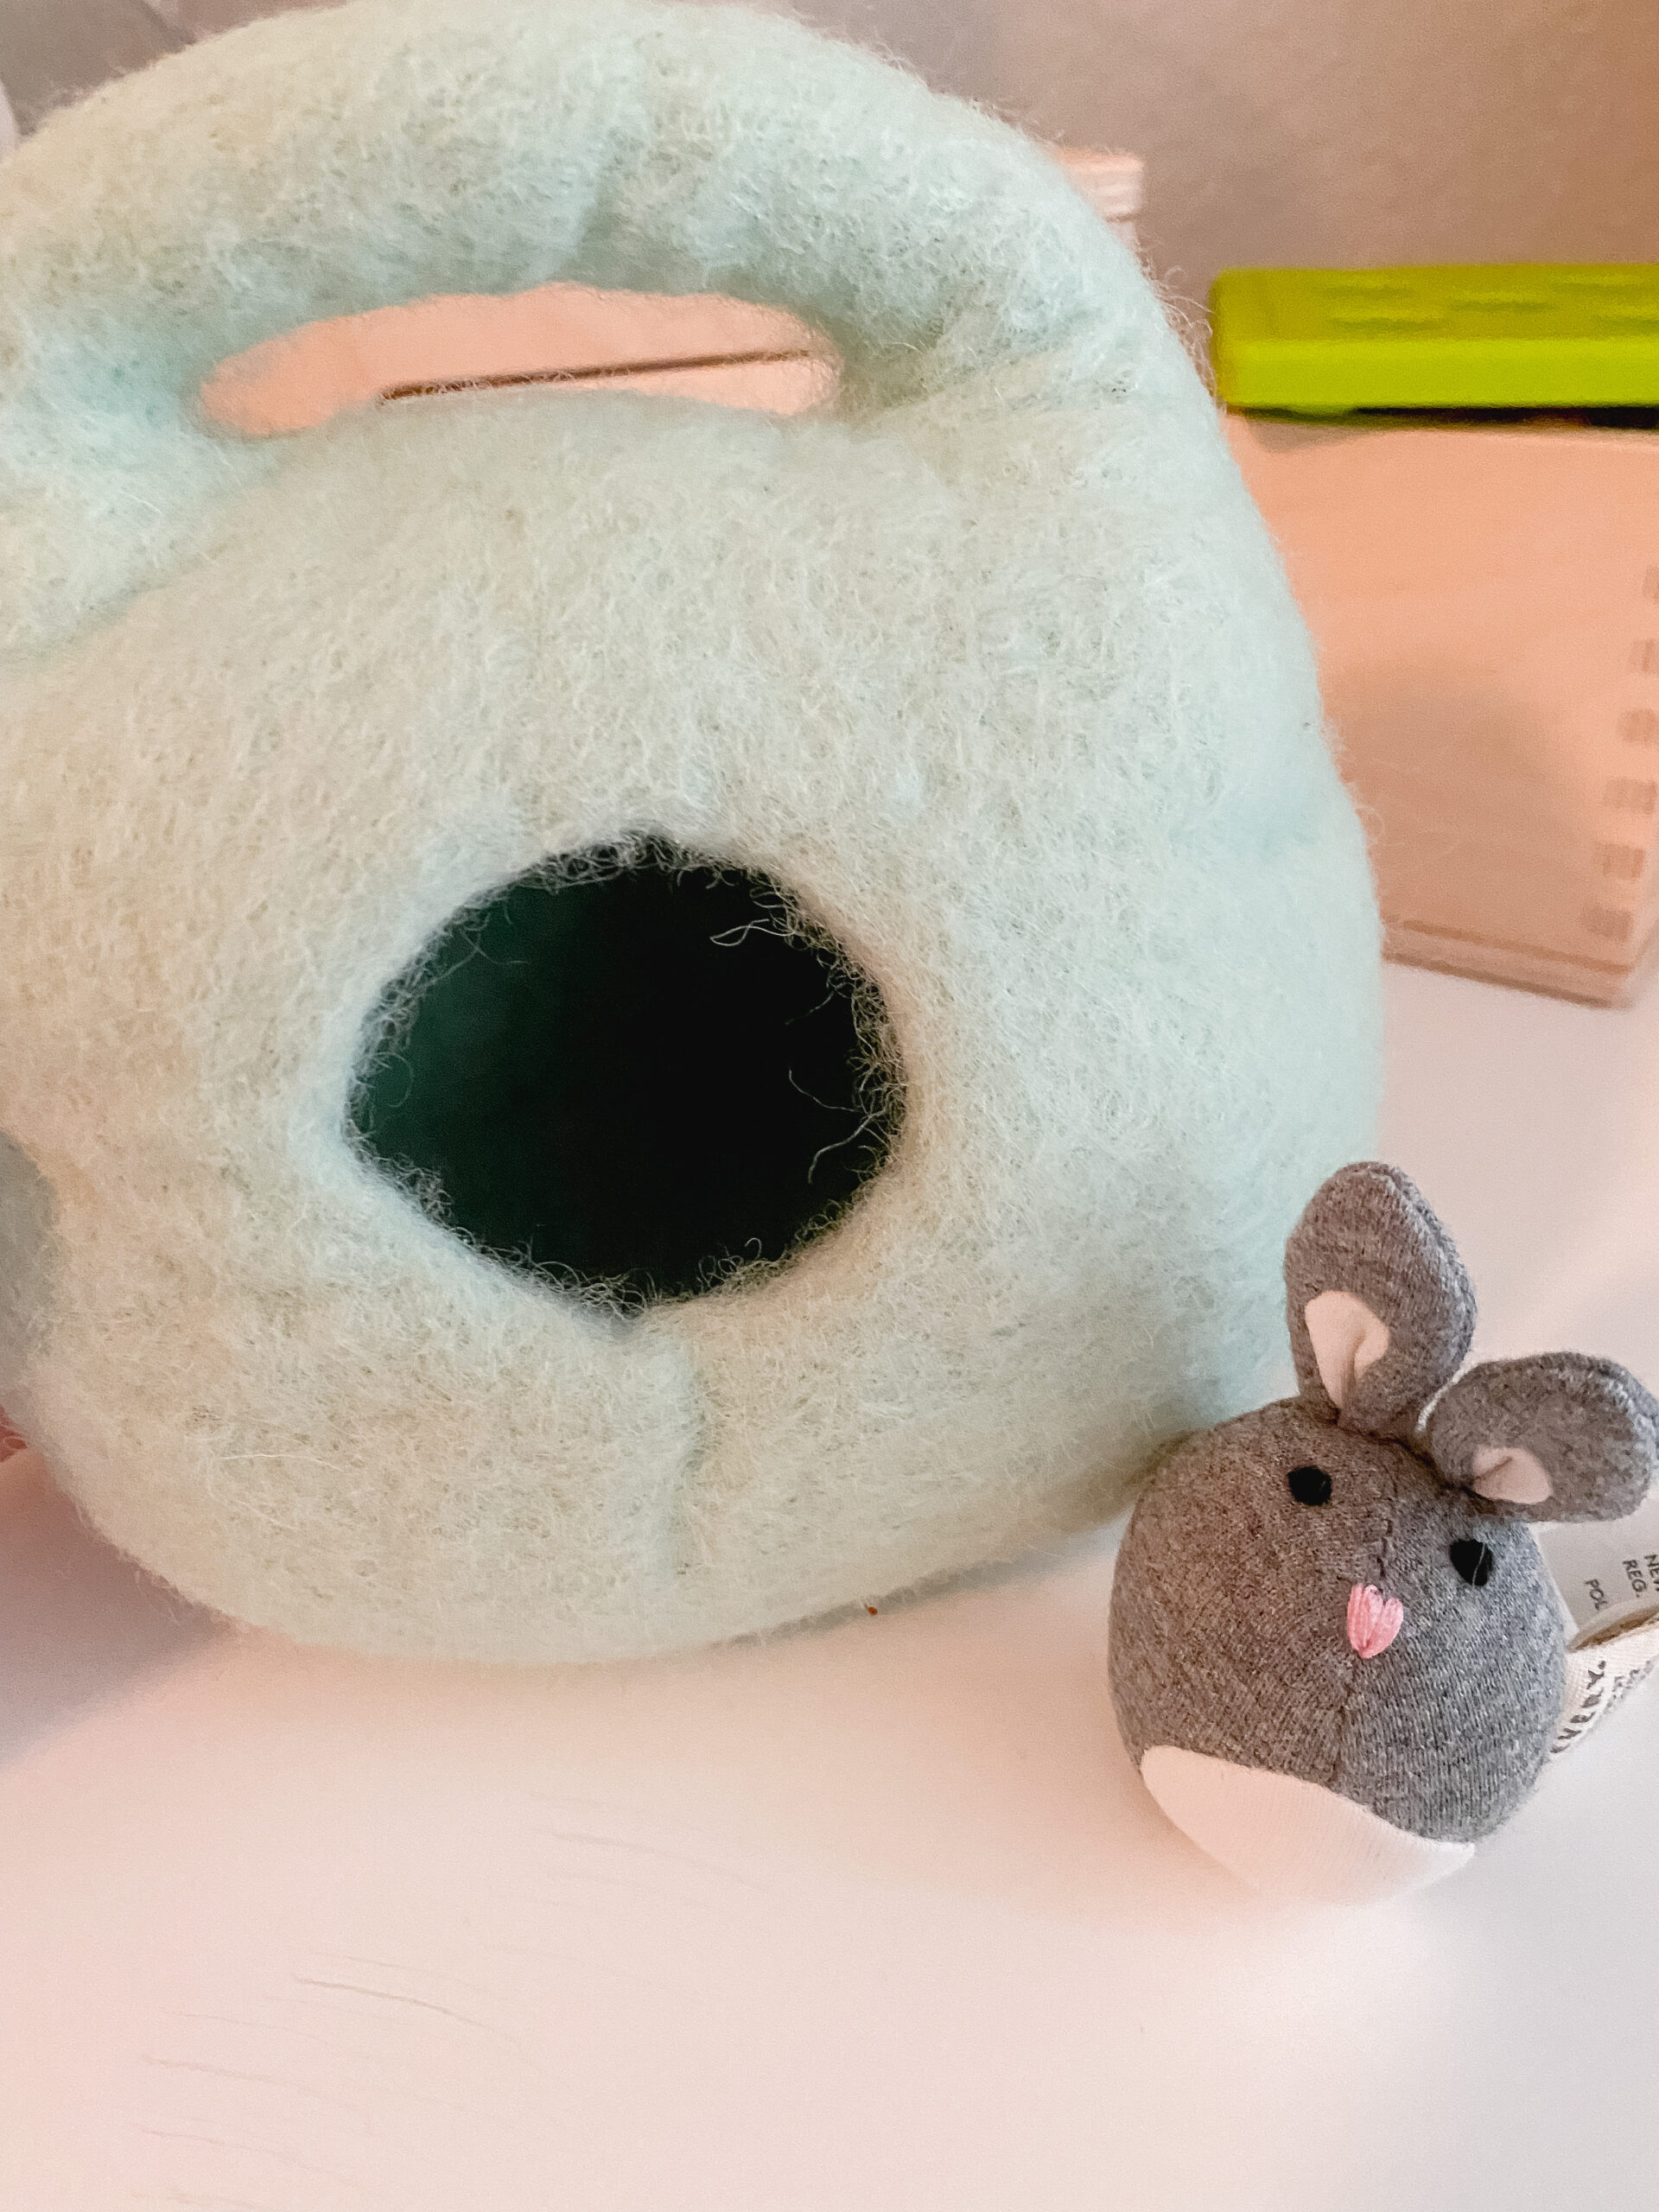 Photo features a green felted wool burrow with a small grey bunny toy in front of it.